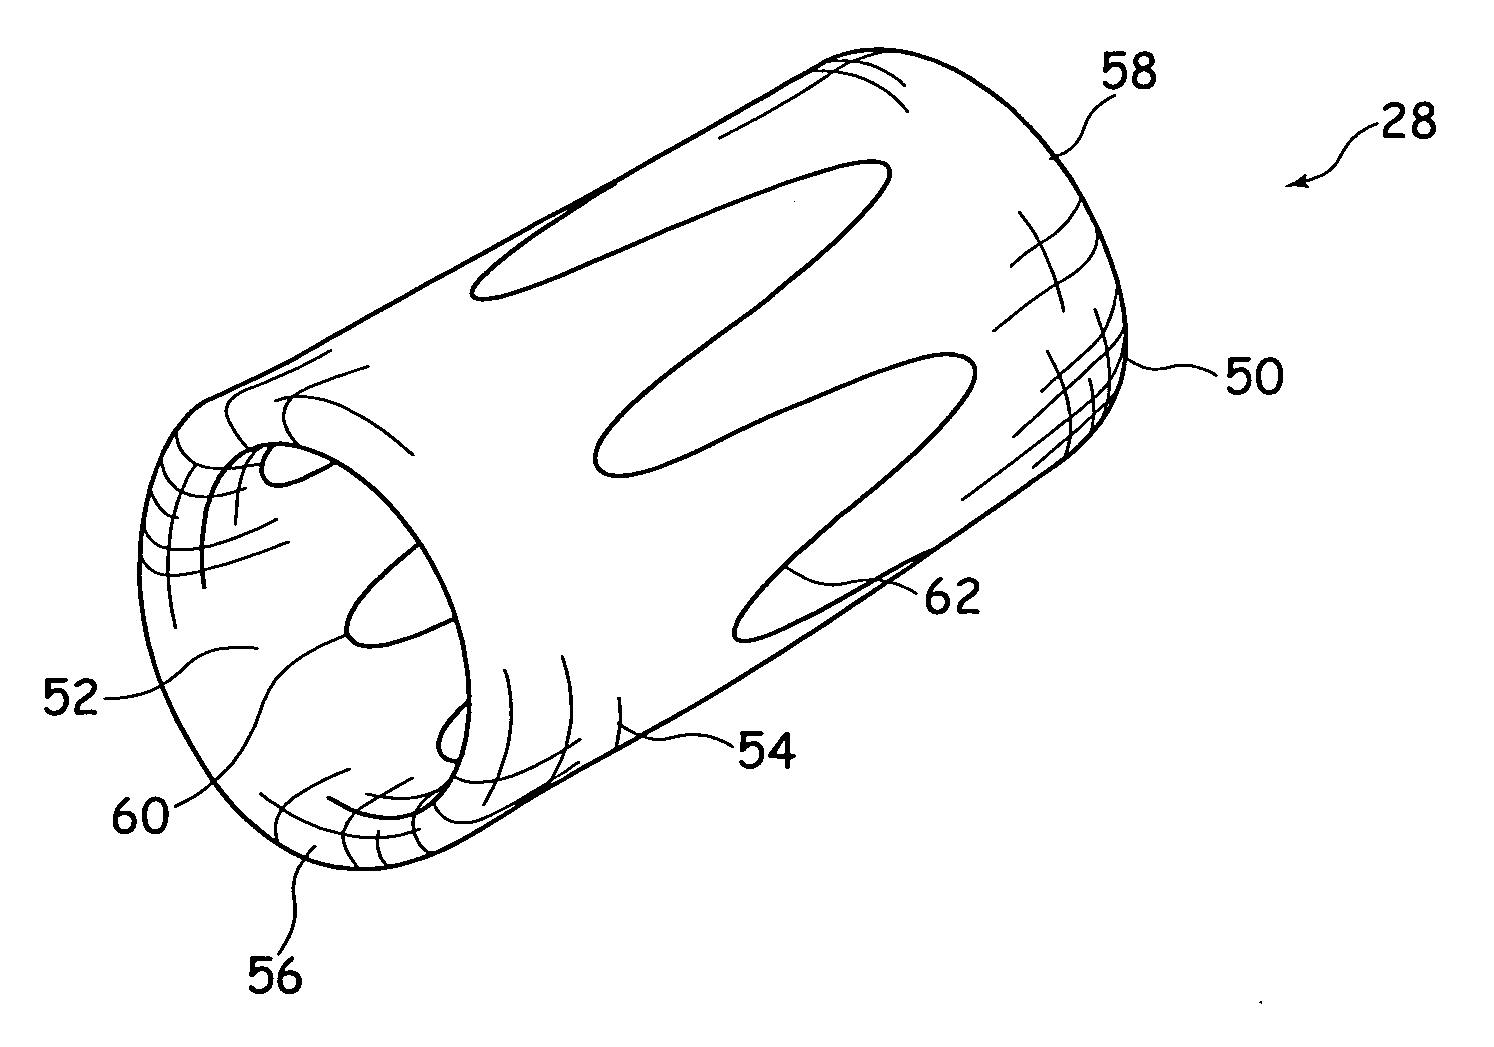 Prosthesis Coupling Device and Method